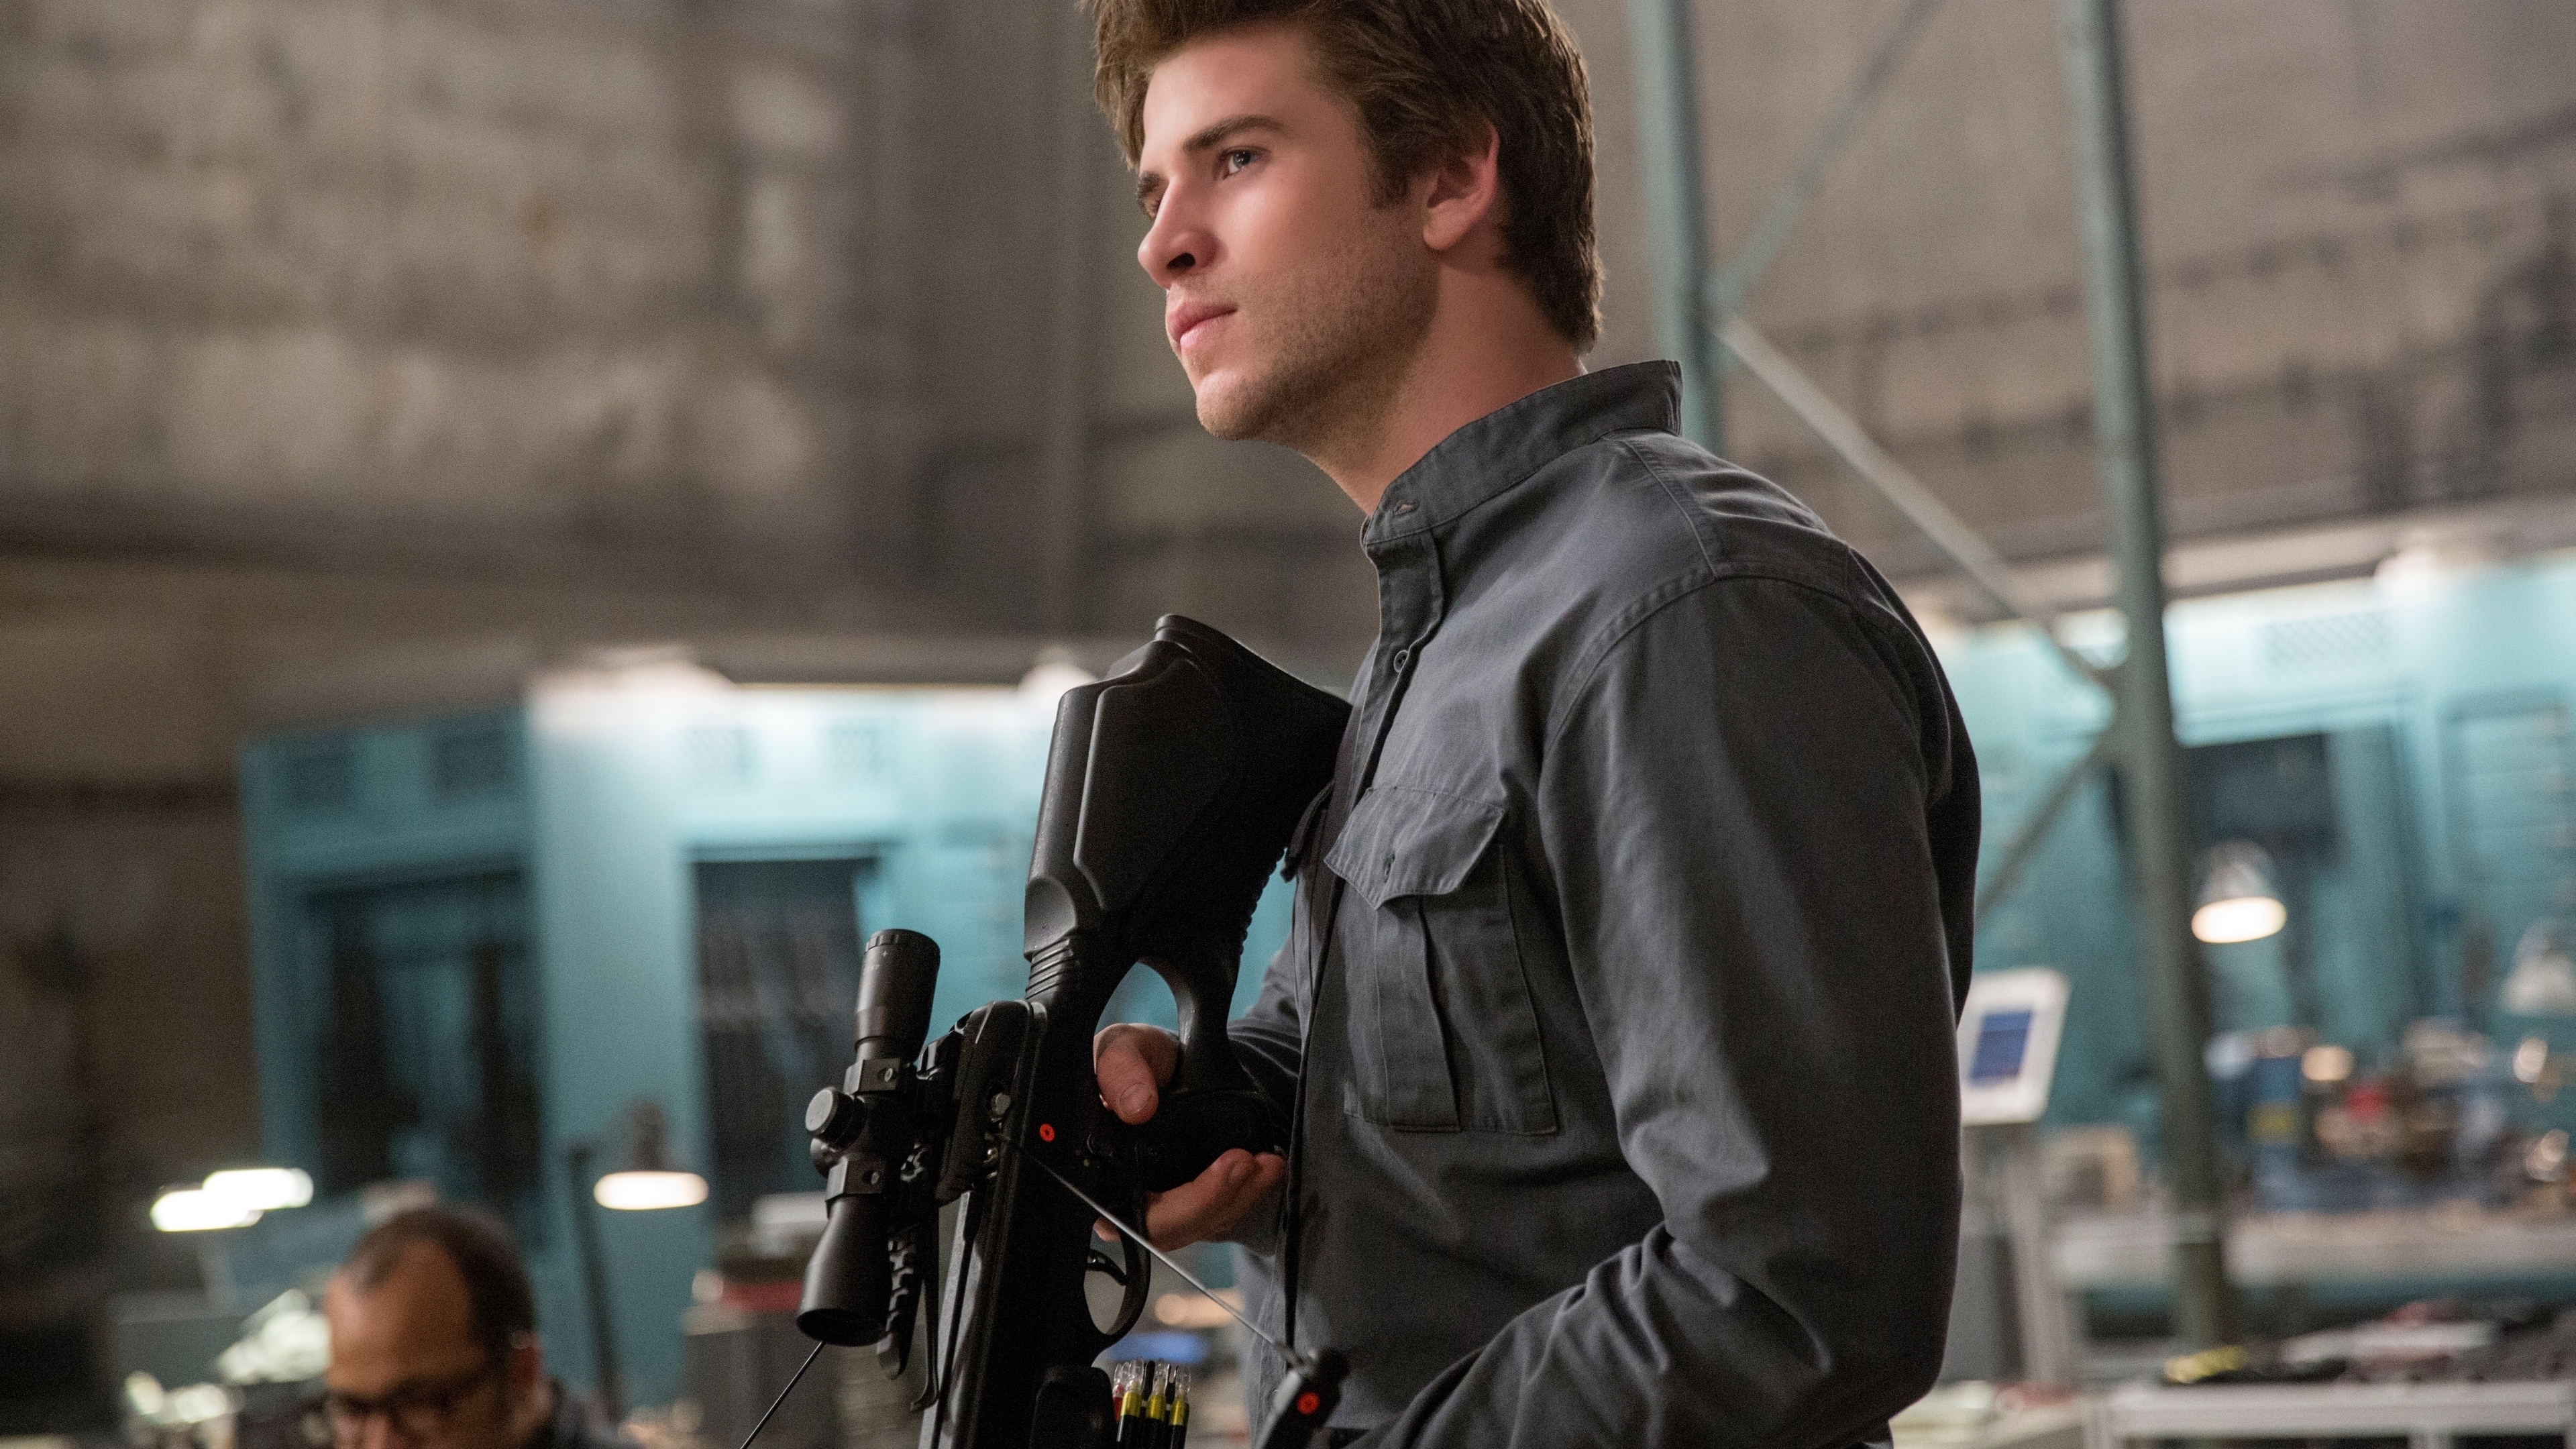 Liam Hemsworth in The Hunger Games for 3840 x 2160 Ultra HD resolution